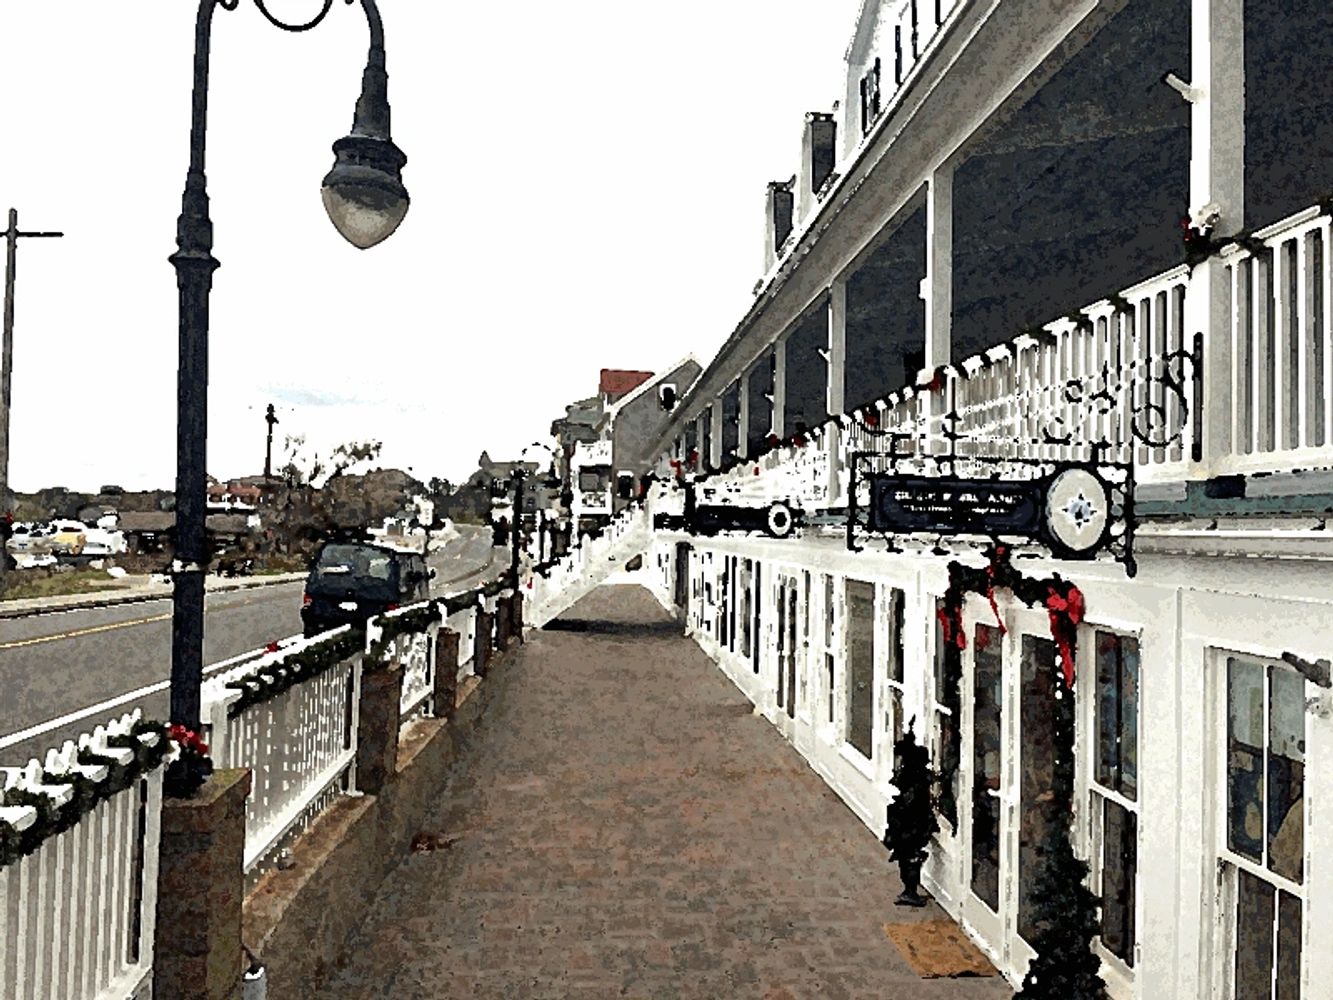 Block Island Trading Company dressed up for the holiday season.